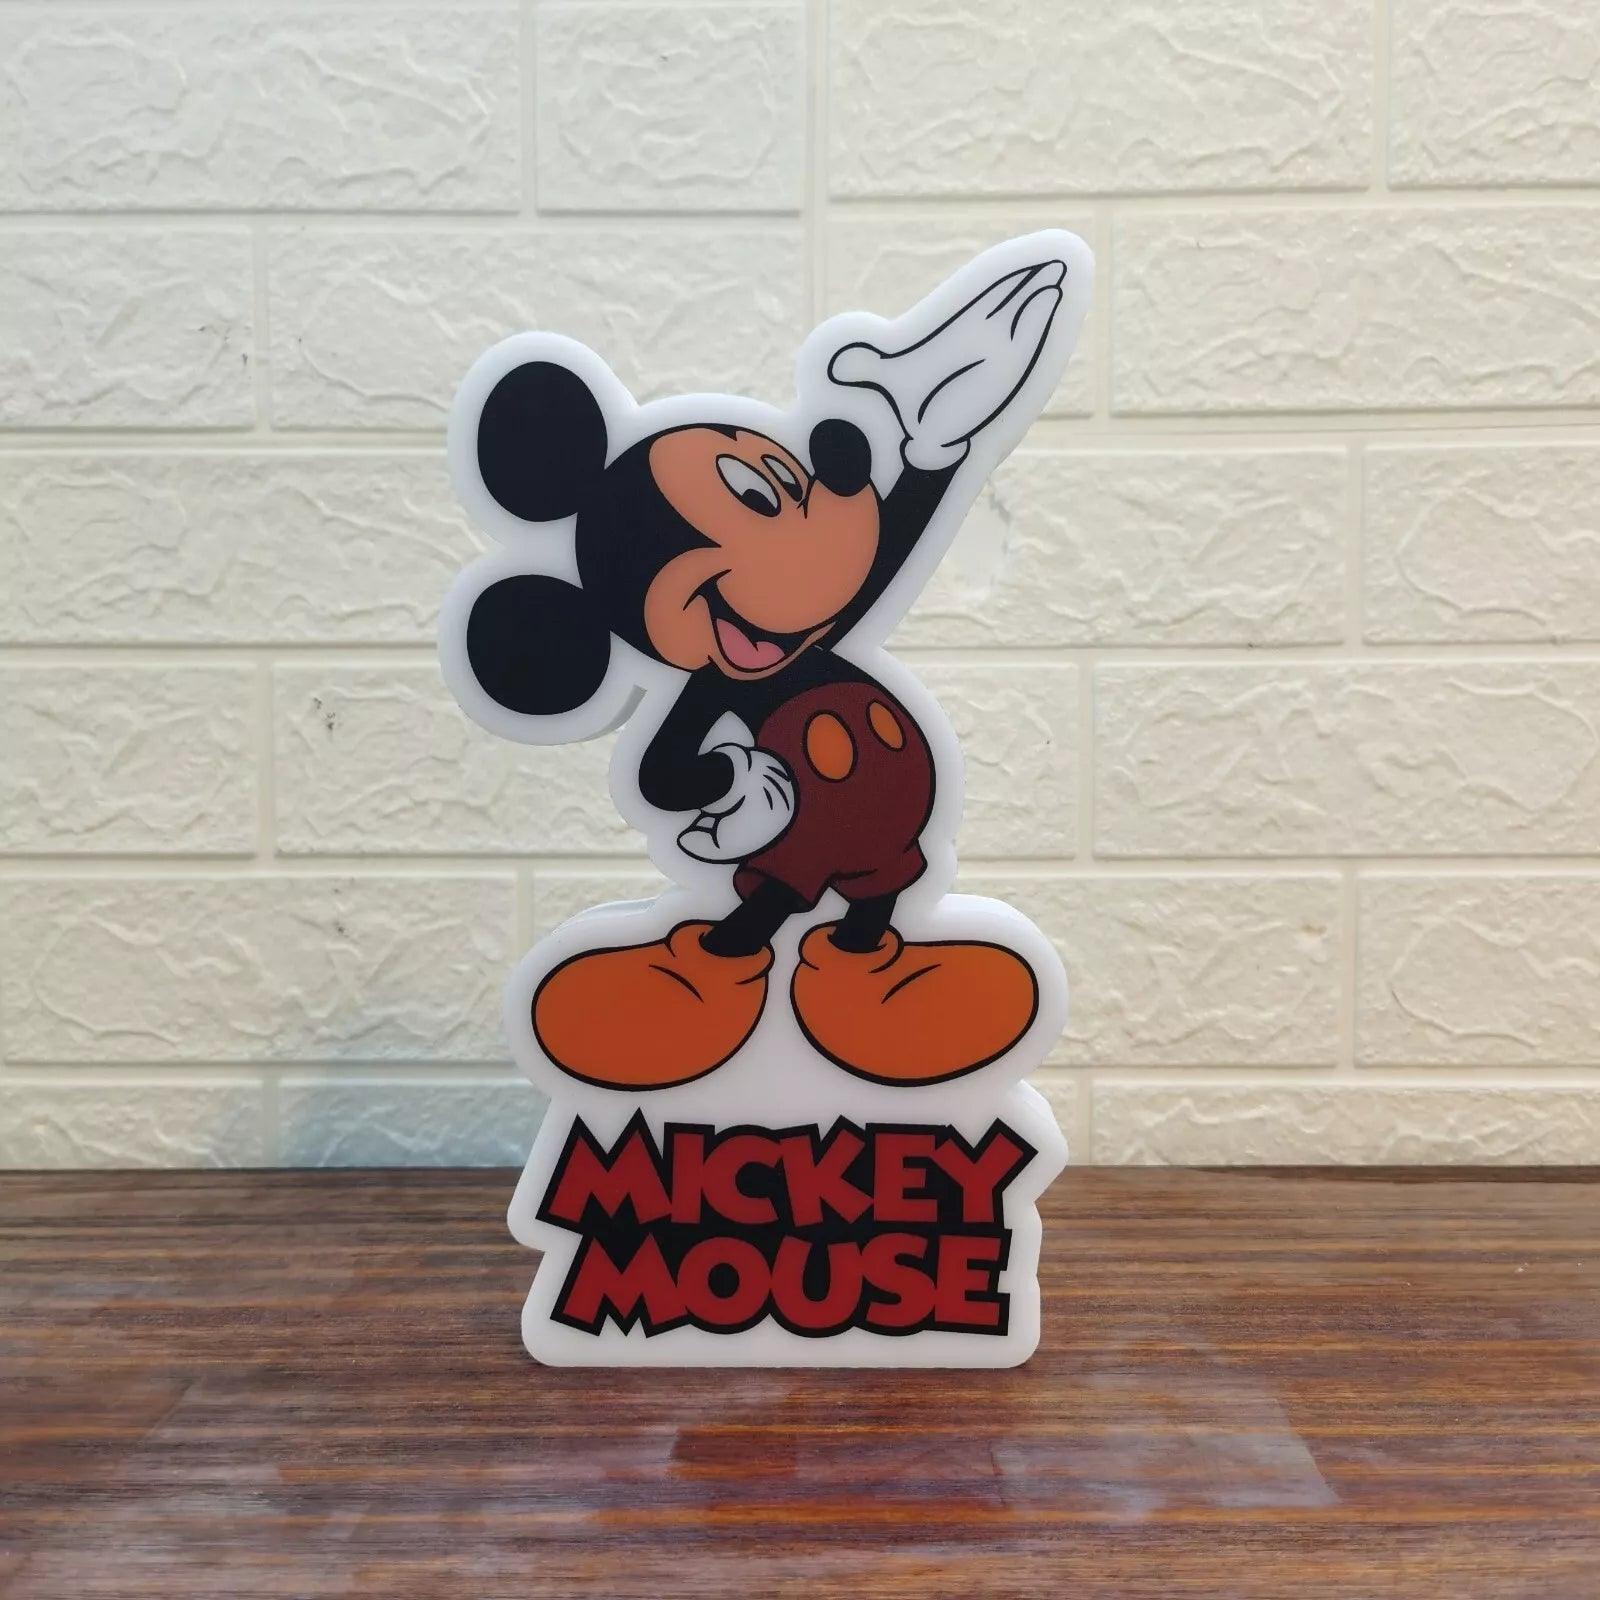 Vintage Mickey Mouse LED logo Dimmable & USB Power Vintage Disney Home Décor - FYLZGO Signs